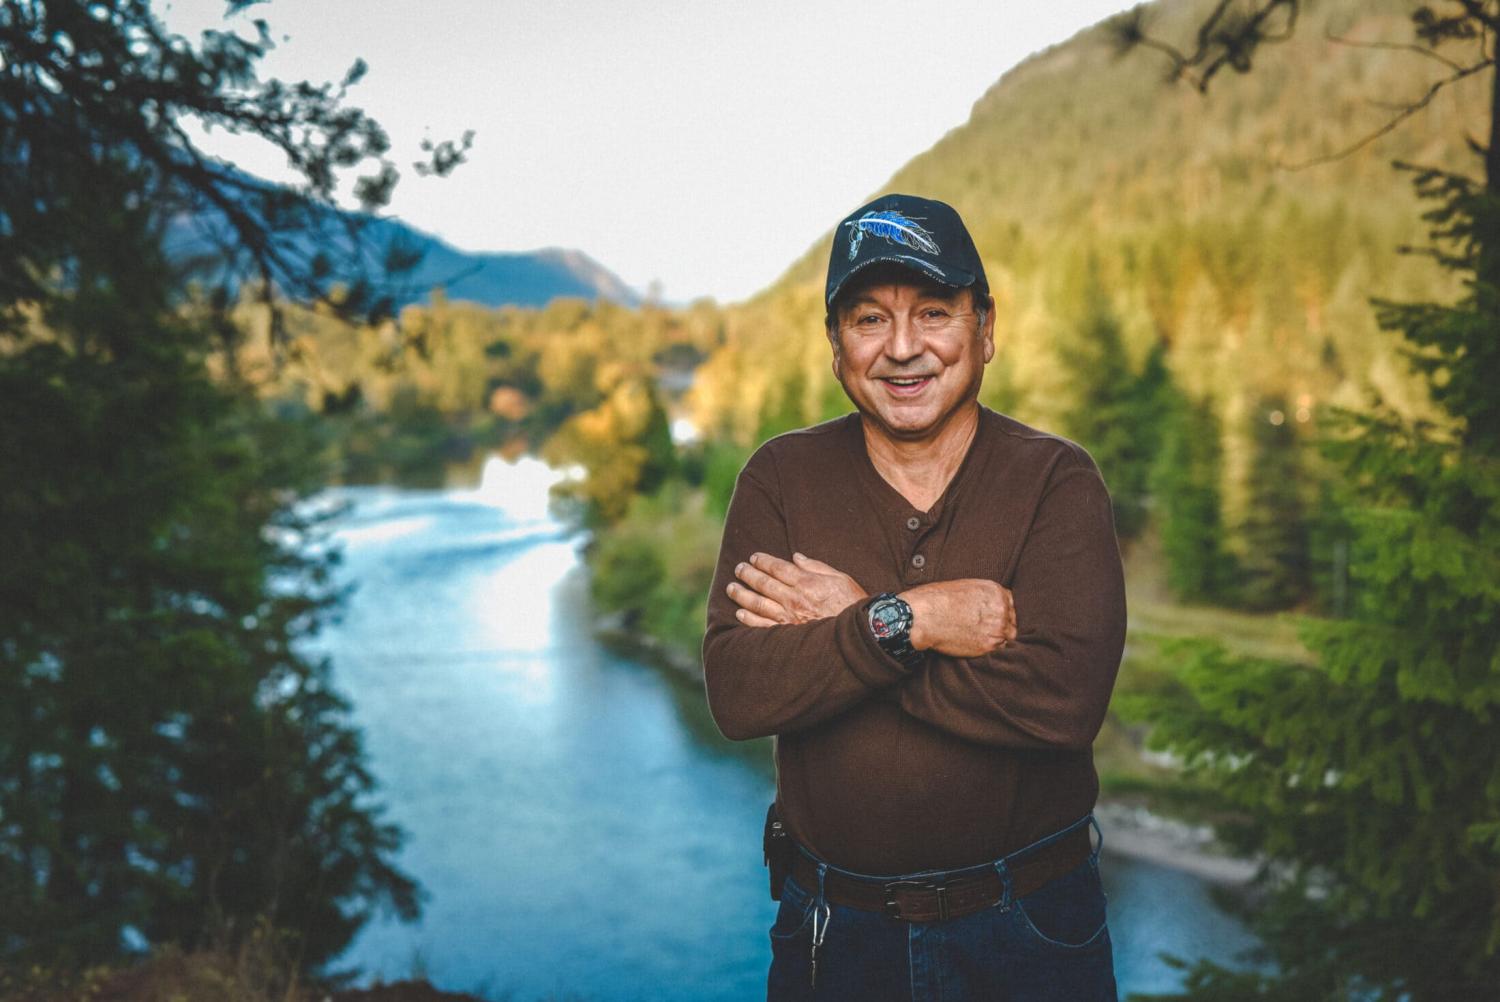 Rick Desautel stands above the Slocan River or Słuʔqín̓, which means “speared in the head,” referring to the Sinixt practice of spearing salmon. Desautel is pictured near the area where he shot an elk in 2010, spurring a lengthy legal battle to determ